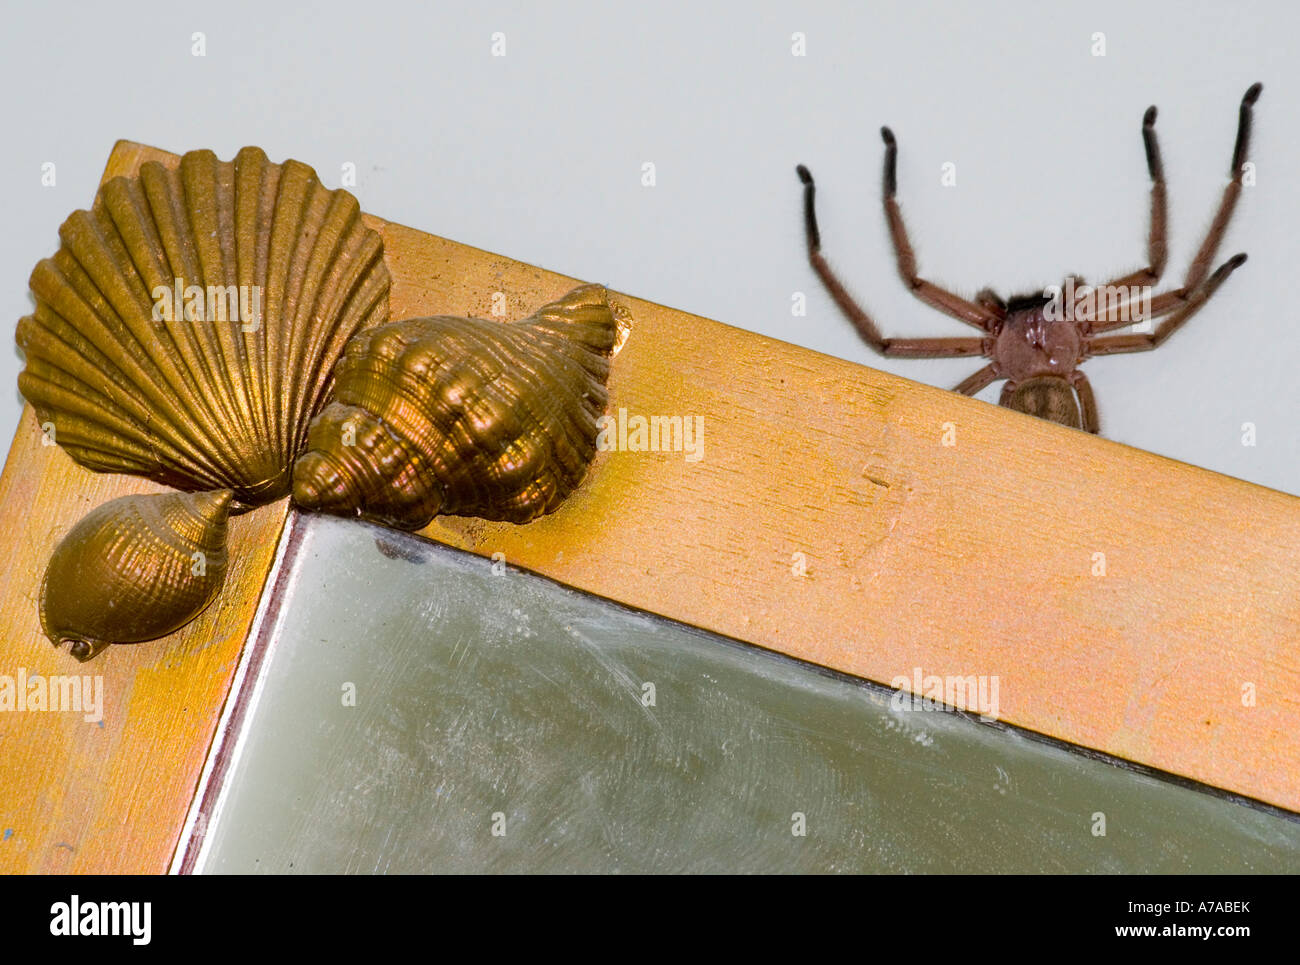 A Huntsman spider crawling out from behind a bathroom mirror Stock Photo